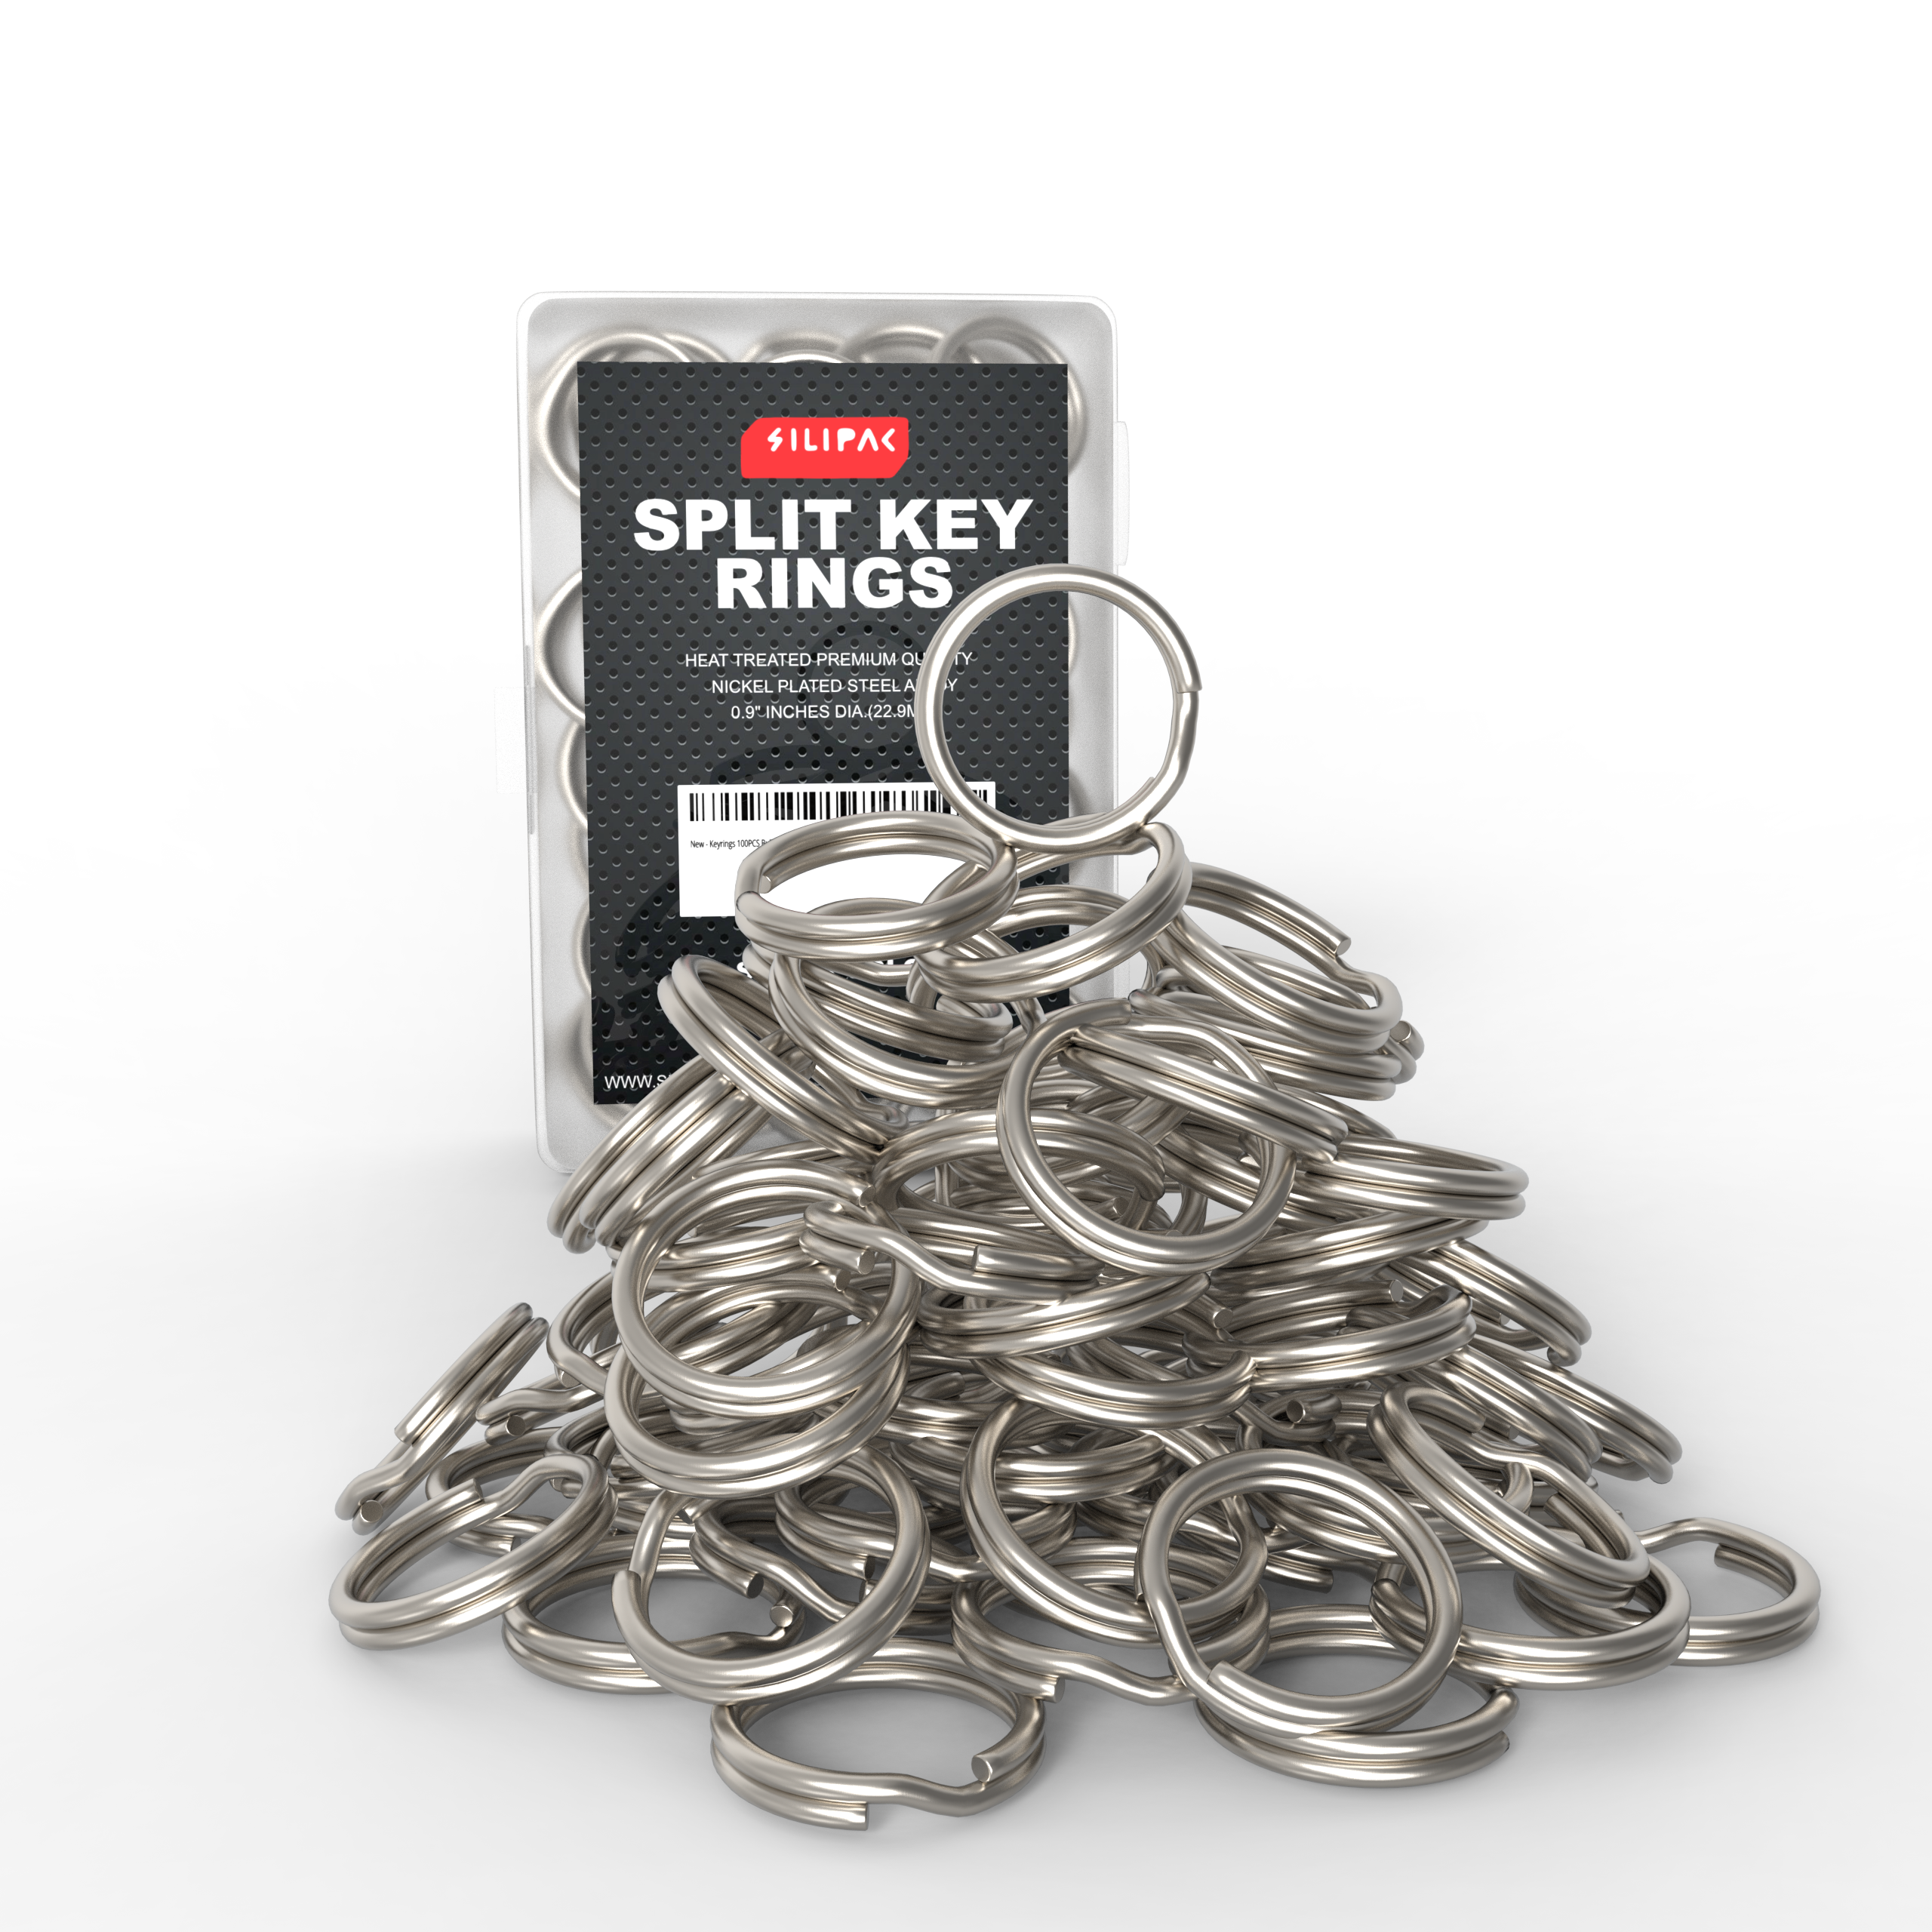 Bulk Key Ring With Chain and Jump Ring, Nickel Plated Key Chains, Wholesale  Keychains 